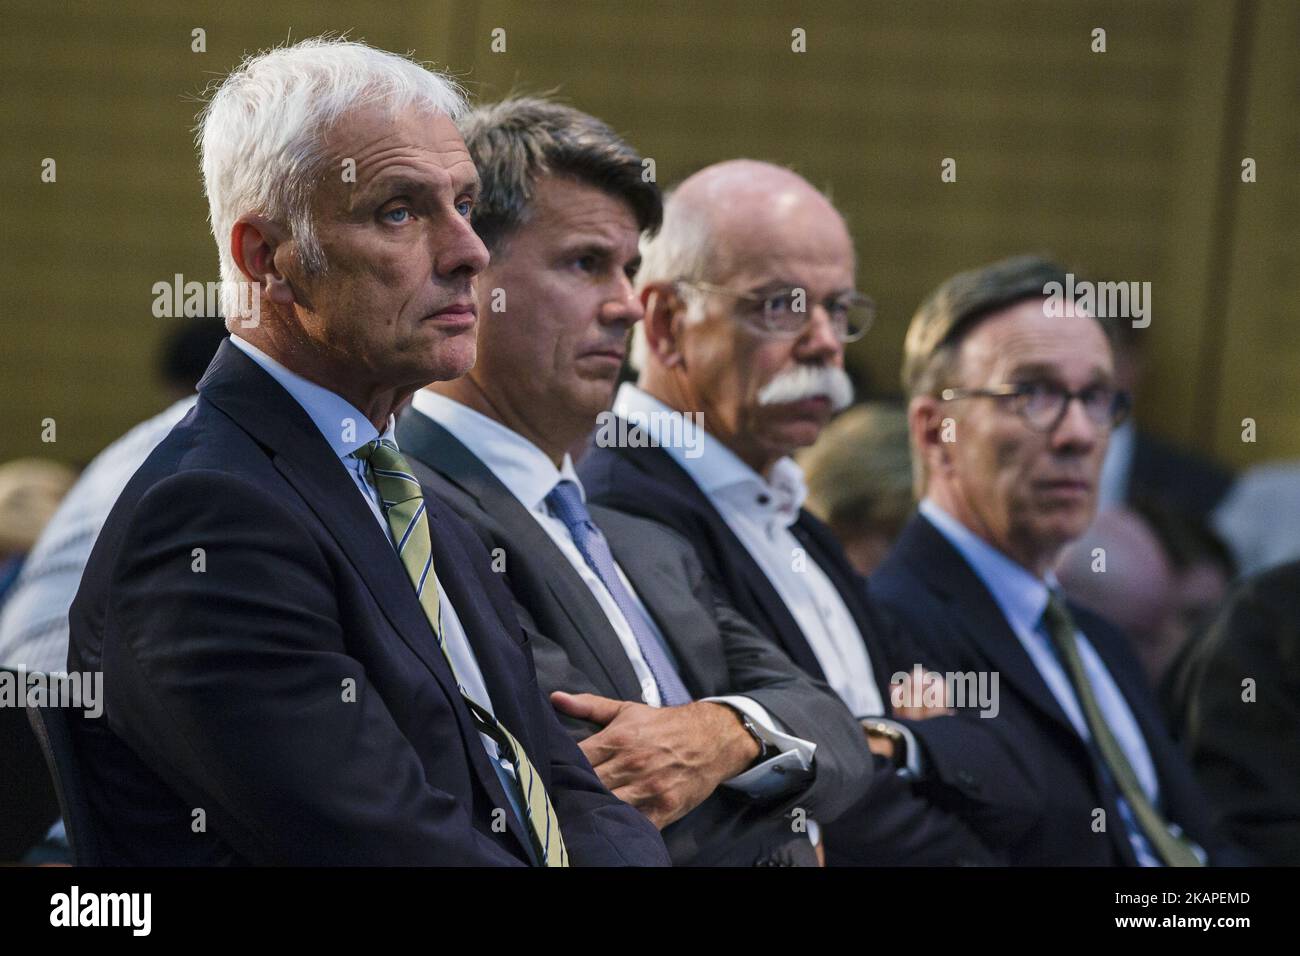 (L-R) CEOs of Volkswagen Matthias Mueller, BMW Harald Krueger, Daimler AG Dieter Zetsche and President of German Automobile Industry Union (VDA) Matthias Wissmann are pictured during a news conference after the Diesel-Summit at the Ministry for Transportation and Digital Infrastructure in Berlin, Germany on August 2, 2017. (Photo by Emmanuele Contini/NurPhoto) *** Please Use Credit from Credit Field *** Stock Photo